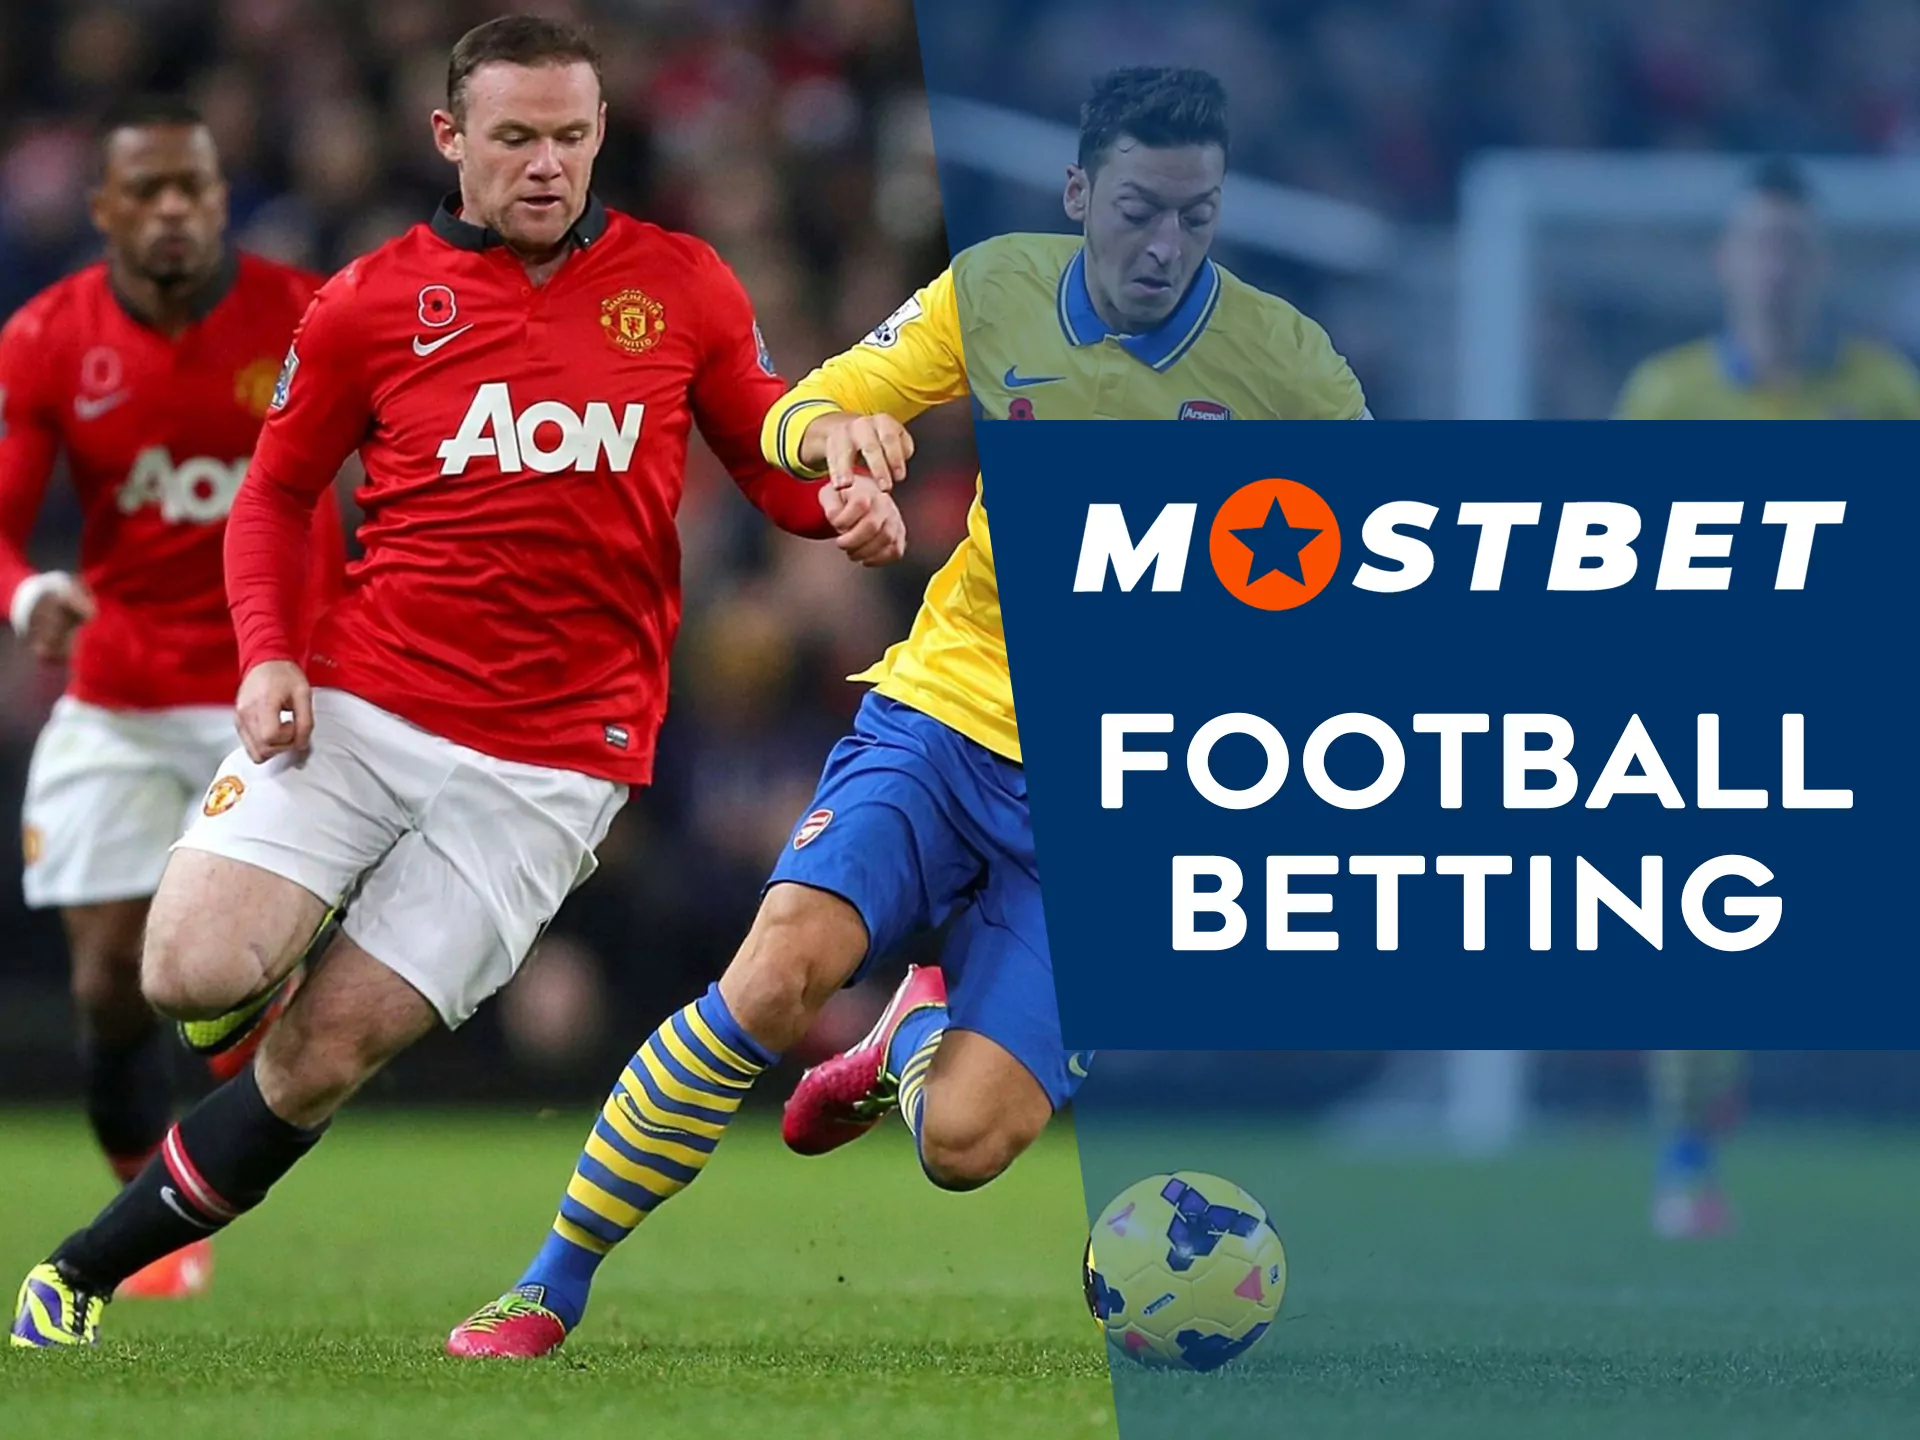 Mostbet football betting section will not leave you indifferent.